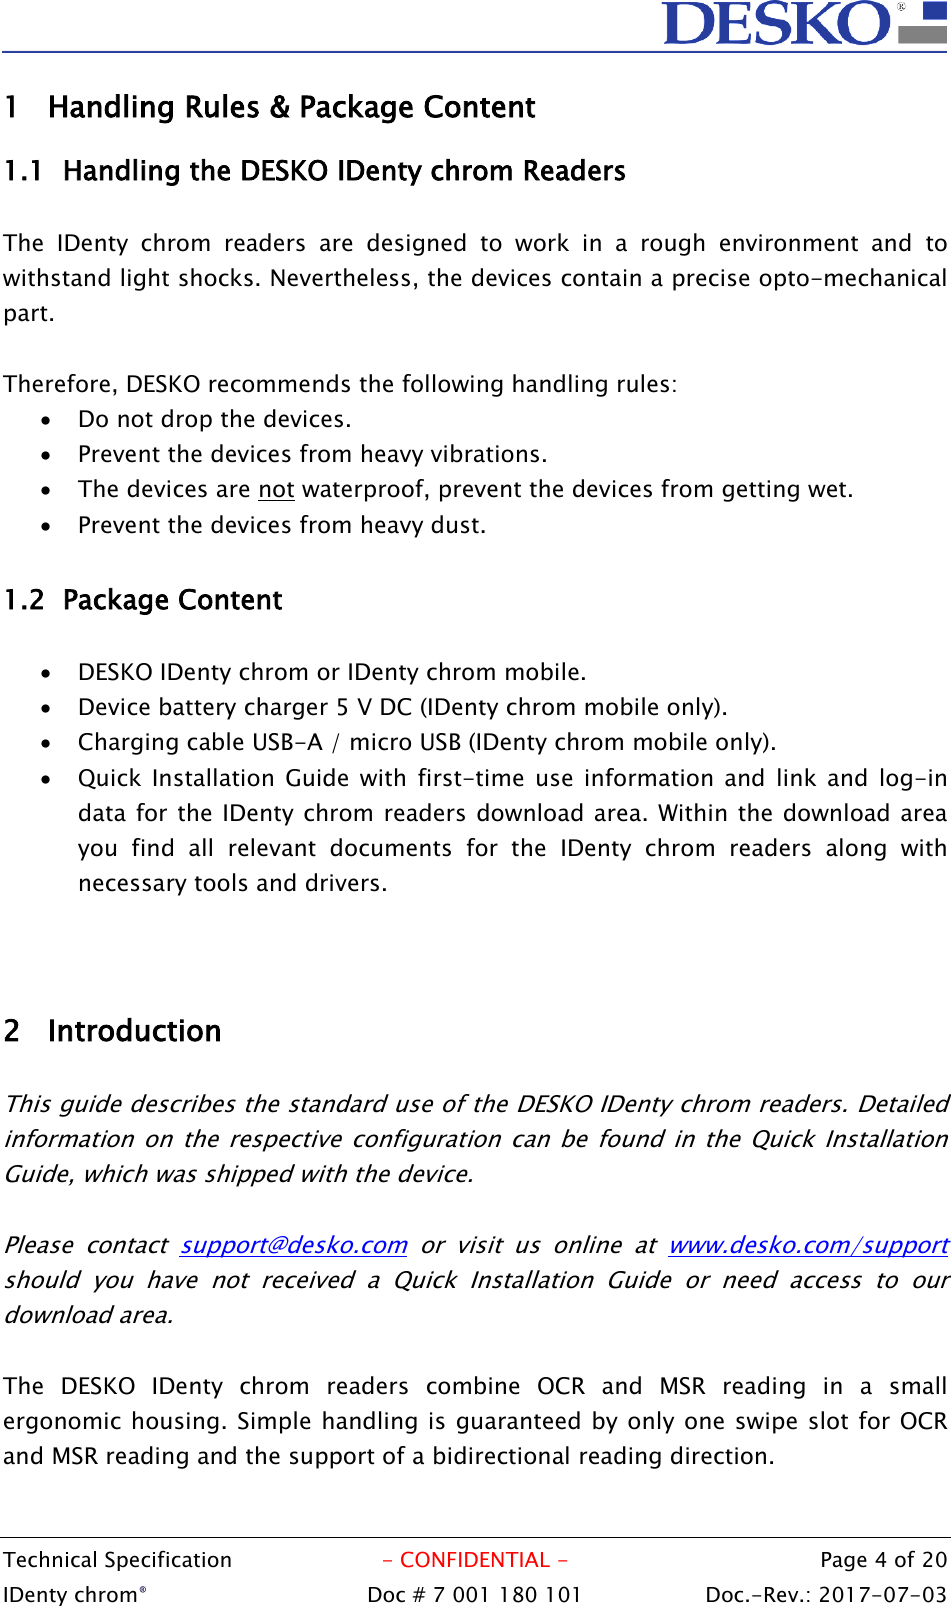  Technical Specification  - CONFIDENTIAL -  Page 4 of 20 IDenty chrom®  Doc # 7 001 180 101   Doc.-Rev.: 2017-07-03   1 Handling Rules &amp; Package Content 1.1 Handling the DESKO IDenty chrom Readers  The  IDenty  chrom  readers  are  designed  to  work  in  a  rough  environment  and  to withstand light shocks. Nevertheless, the devices contain a precise opto-mechanical part.  Therefore, DESKO recommends the following handling rules:  Do not drop the devices.  Prevent the devices from heavy vibrations.  The devices are not waterproof, prevent the devices from getting wet.   Prevent the devices from heavy dust.  1.2 Package Content   DESKO IDenty chrom or IDenty chrom mobile.  Device battery charger 5 V DC (IDenty chrom mobile only).  Charging cable USB-A / micro USB (IDenty chrom mobile only).  Quick  Installation  Guide with  first-time use information  and  link  and  log-in data for the IDenty chrom readers download area. Within the download area you  find  all  relevant  documents  for  the  IDenty  chrom  readers  along  with necessary tools and drivers.    2 Introduction  This guide describes the standard use of the DESKO IDenty chrom readers. Detailed information on  the respective configuration  can  be  found  in  the Quick  Installation Guide, which was shipped with the device.  Please  contact  support@desko.com  or  visit  us  online  at  www.desko.com/support should  you  have  not  received  a  Quick  Installation  Guide  or  need  access  to  our download area.  The  DESKO  IDenty  chrom  readers  combine  OCR  and  MSR  reading  in  a  small ergonomic housing. Simple handling is guaranteed by only one swipe slot for OCR and MSR reading and the support of a bidirectional reading direction.   